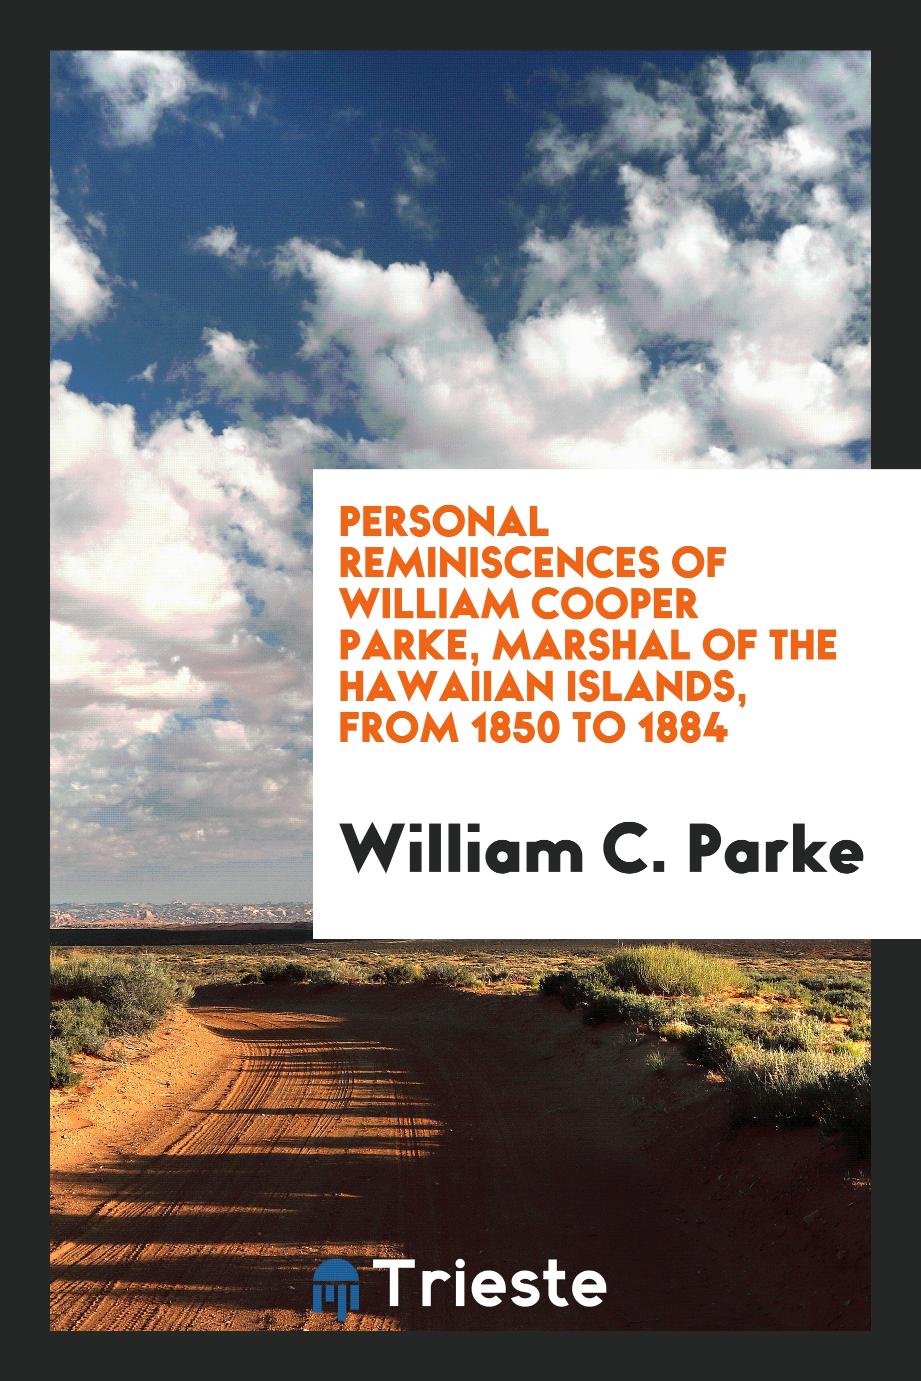 Personal Reminiscences of William Cooper Parke, Marshal of the Hawaiian Islands, from 1850 to 1884